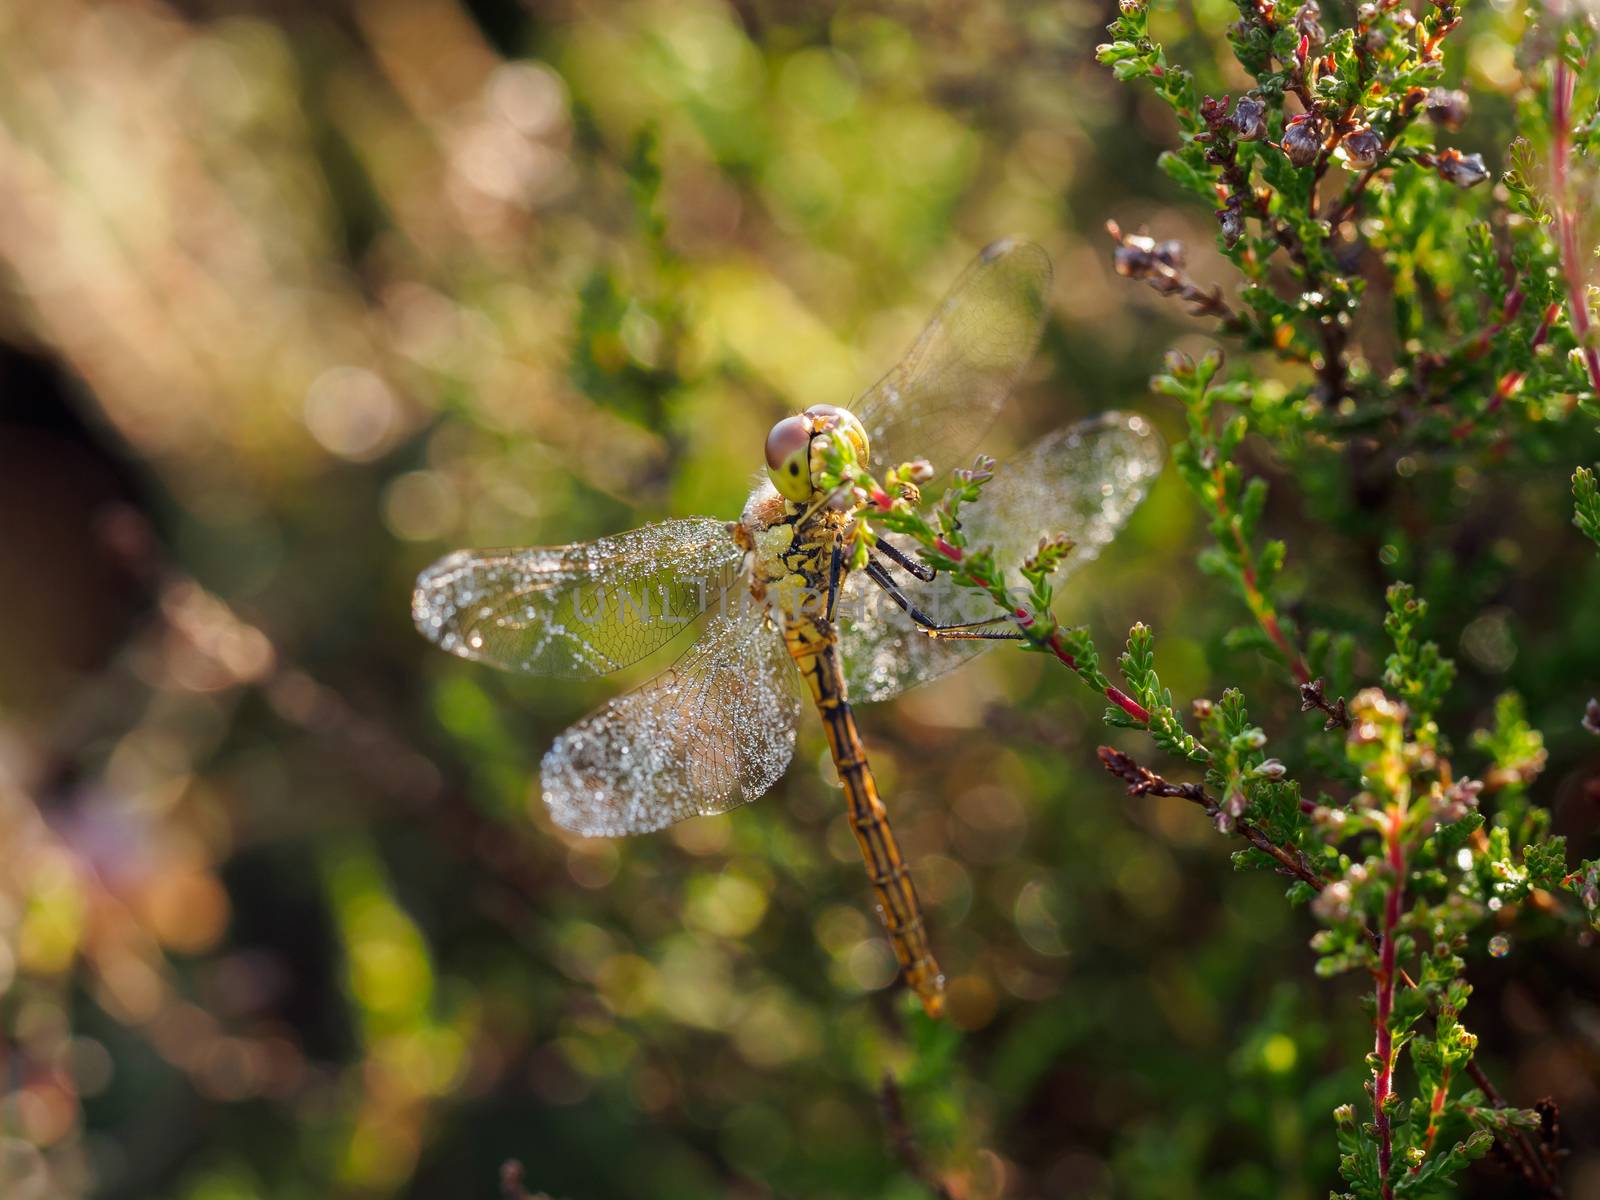 Early morning portrait of yellow dragonfly with dew on its wings